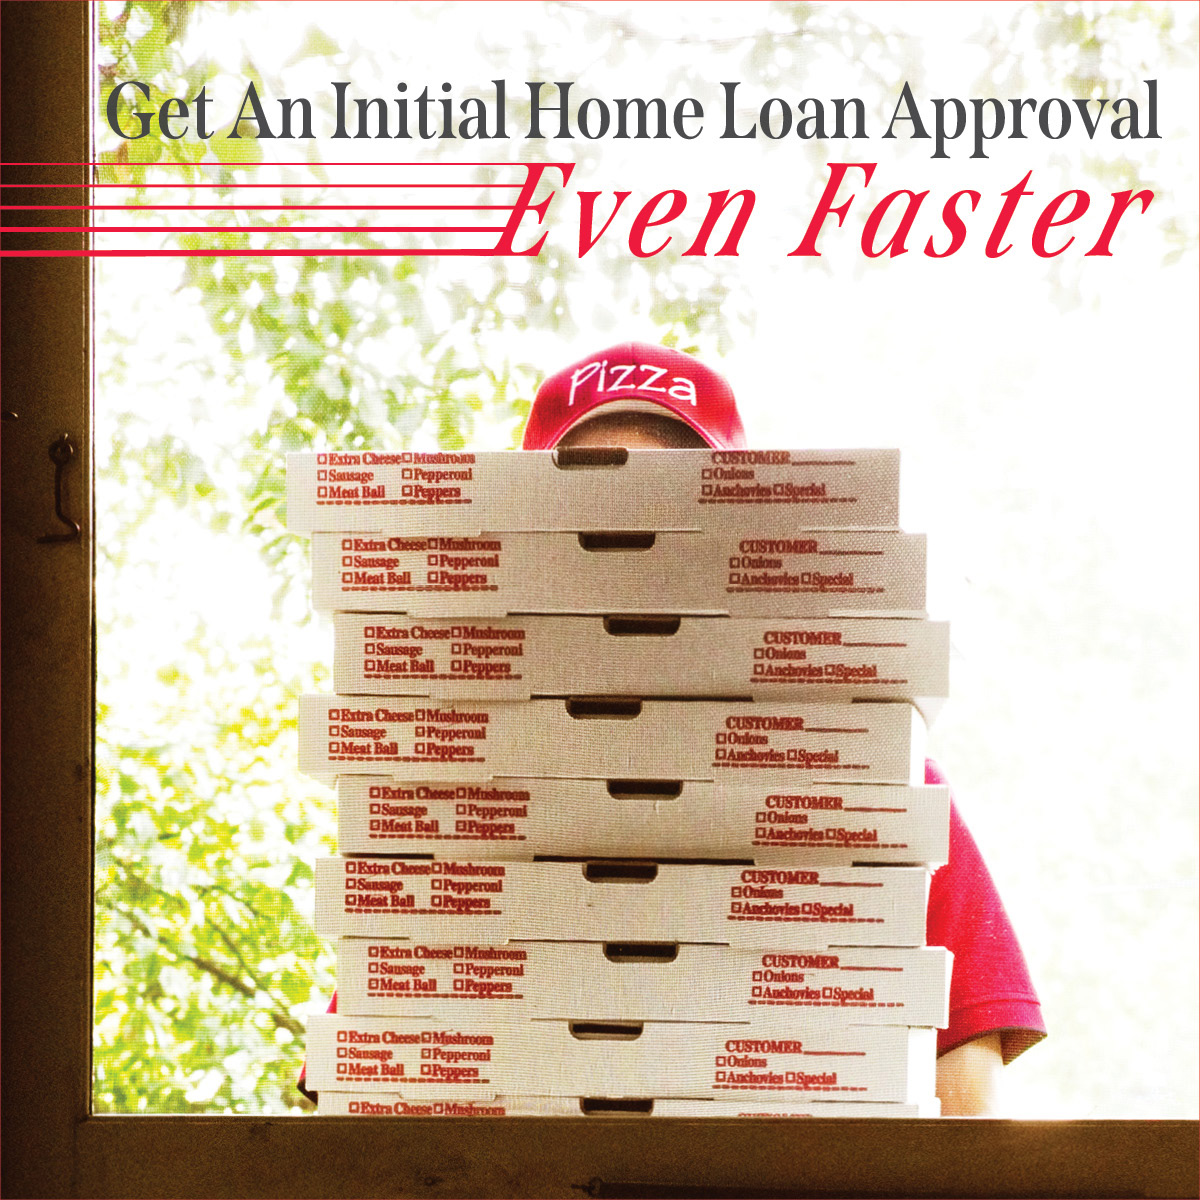 I can get you an initial mortgage approval faster than you can get a pizza 🍕 delivered — in as little as 15 minutes! 📞Call me today to learn more.
#mortgageapproval #fastapproval #dreamhome